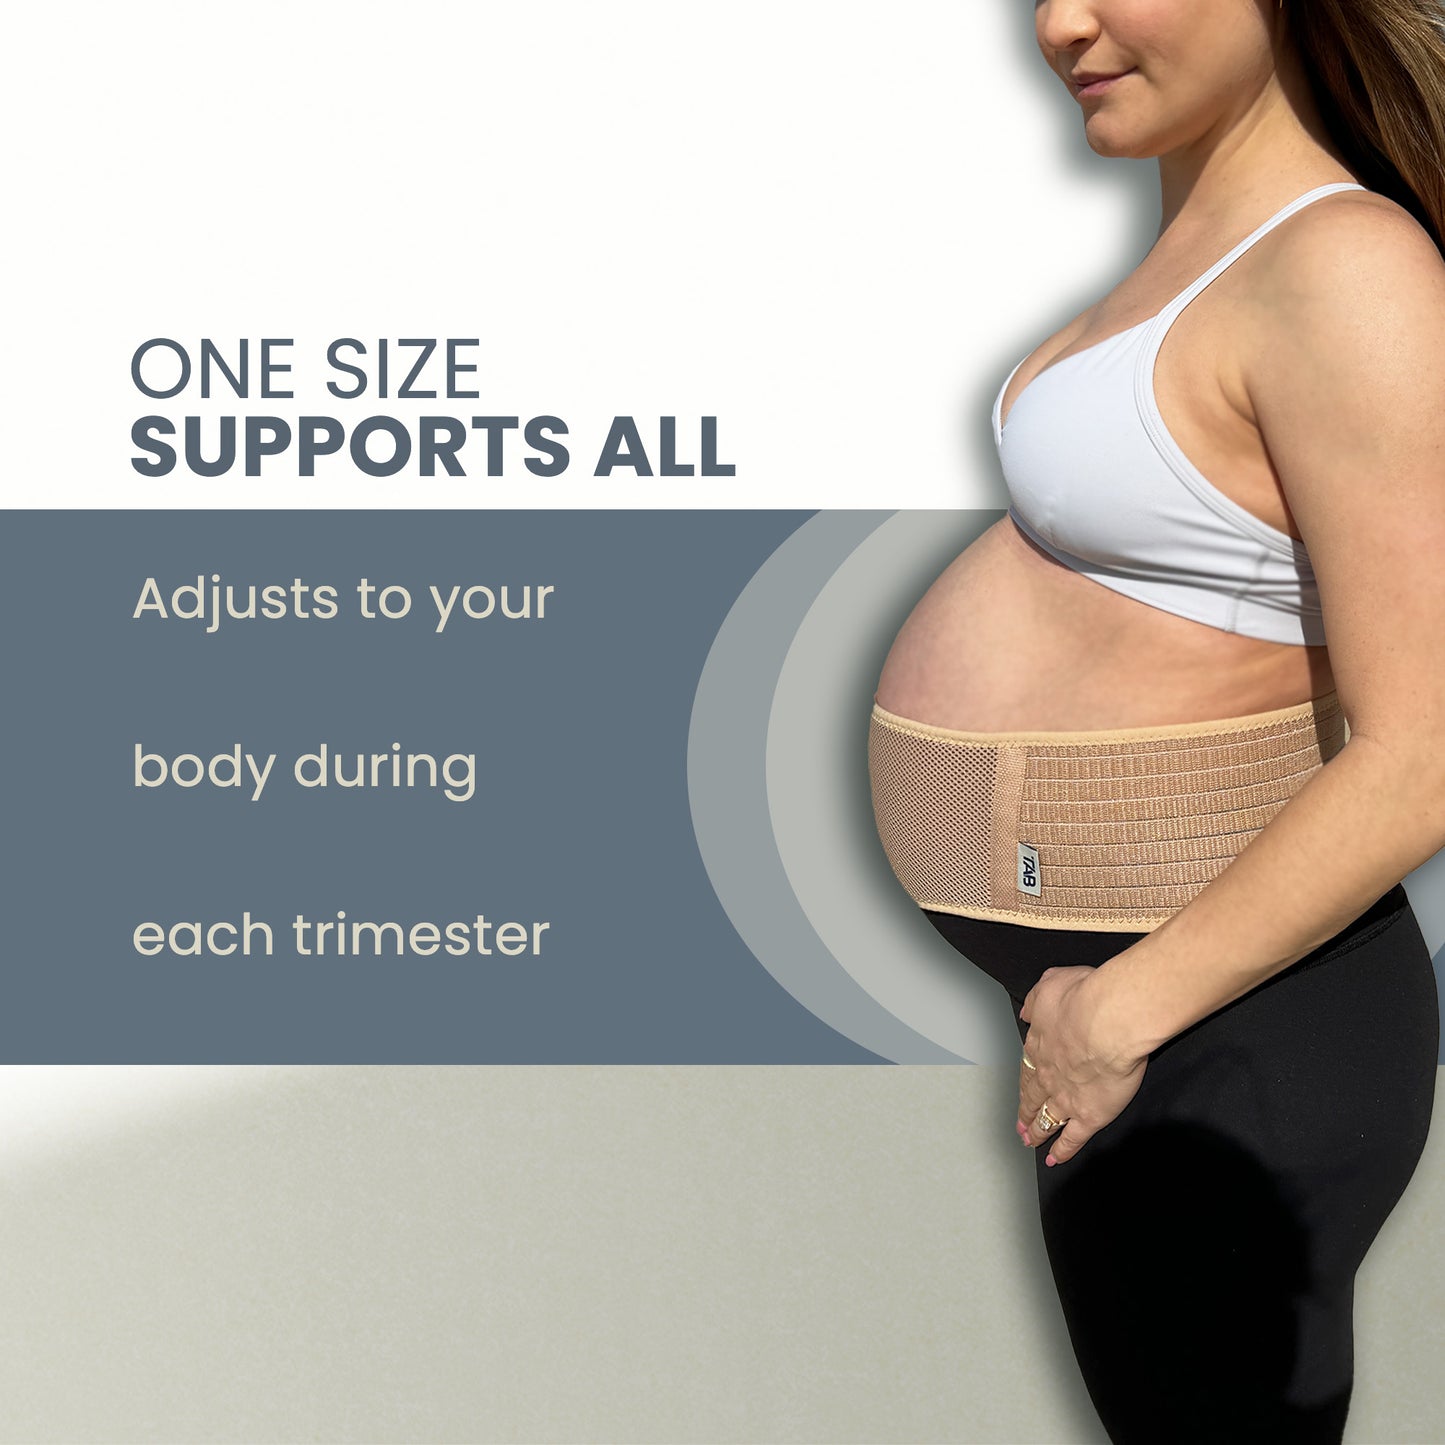 TAB Maternity Pregnancy Belly Band - Soft & Breathable Support Belt, Pelvic Band,Tummy Sling for Pants, Back Brace for Pregnant Women - Pregnancy Must Haves, Postpartum Belly Band, Pregnant Mom Gift